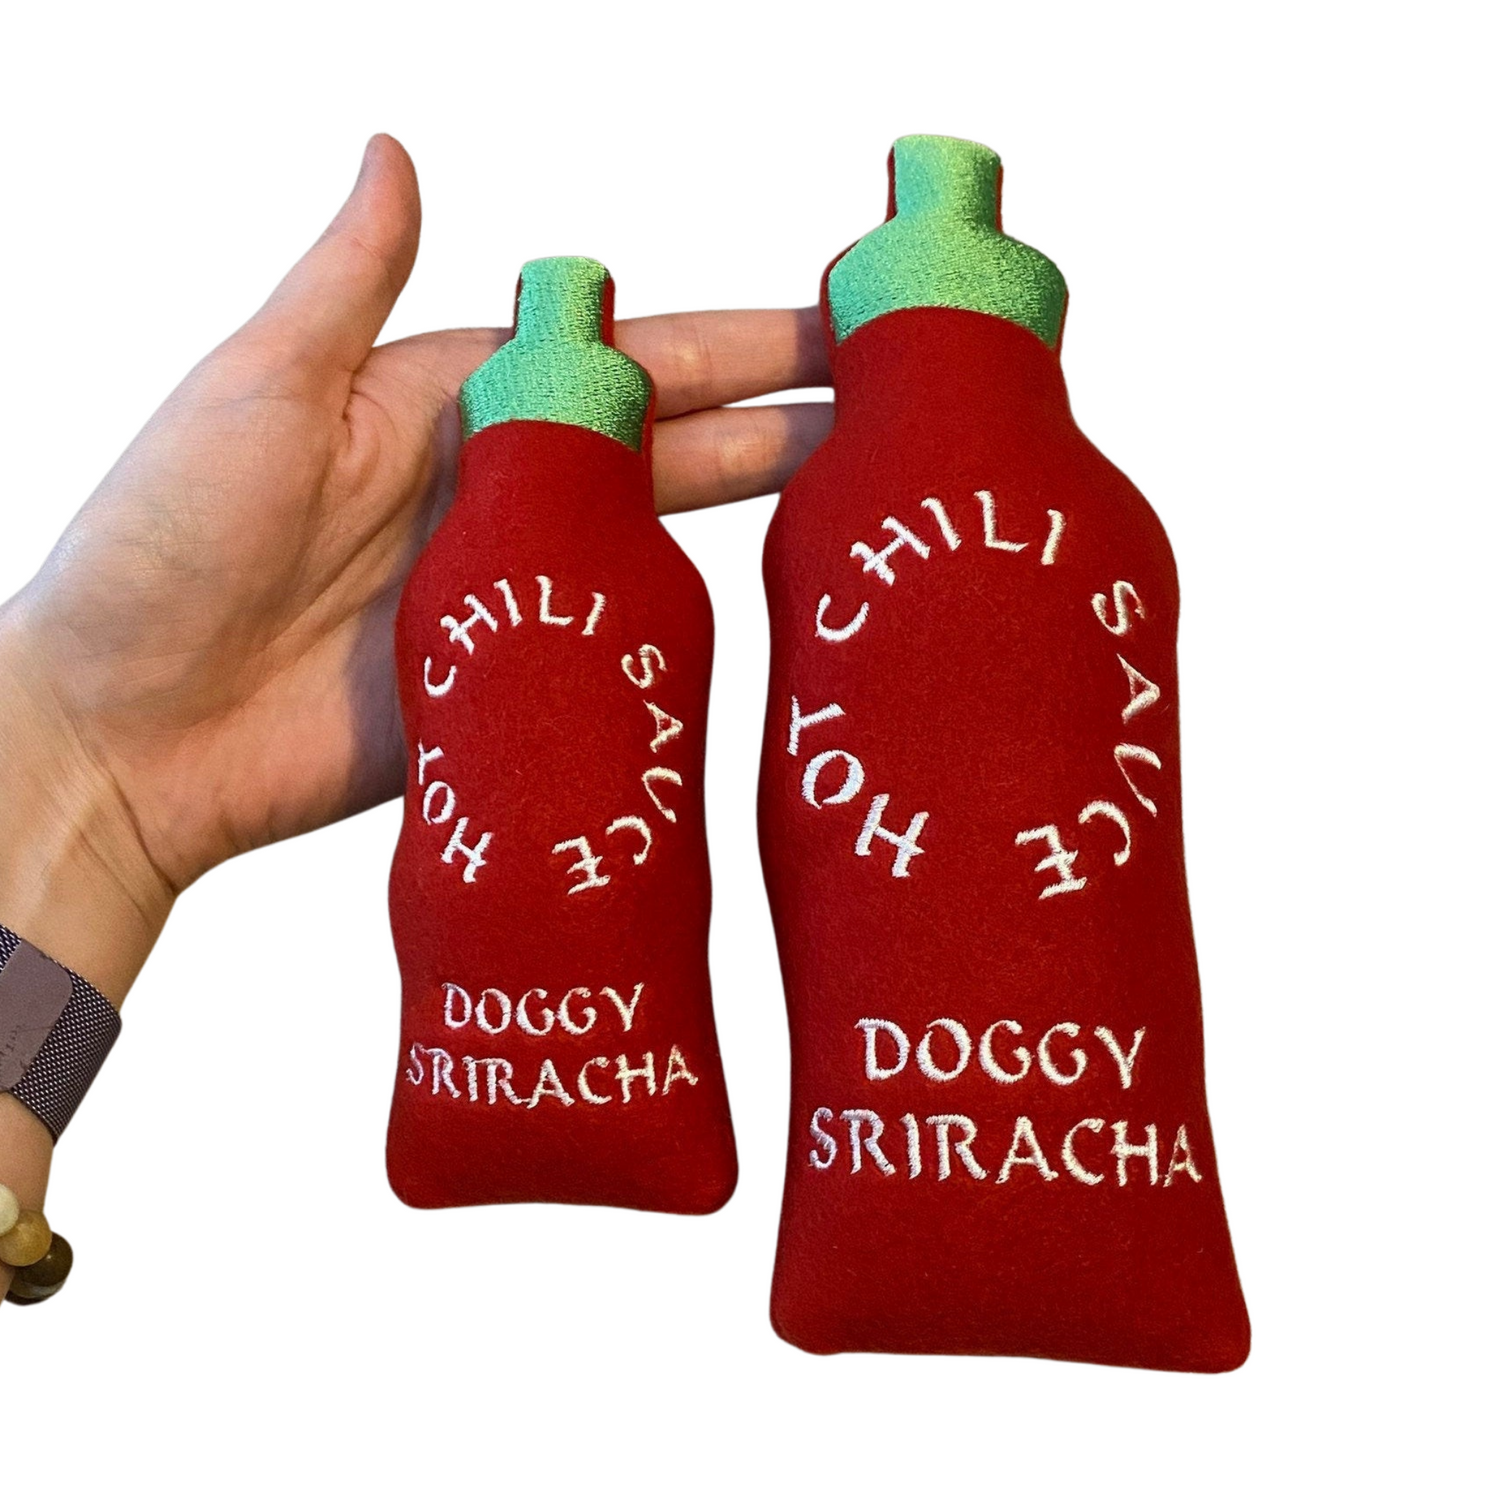 Non-personalized Dog Toys